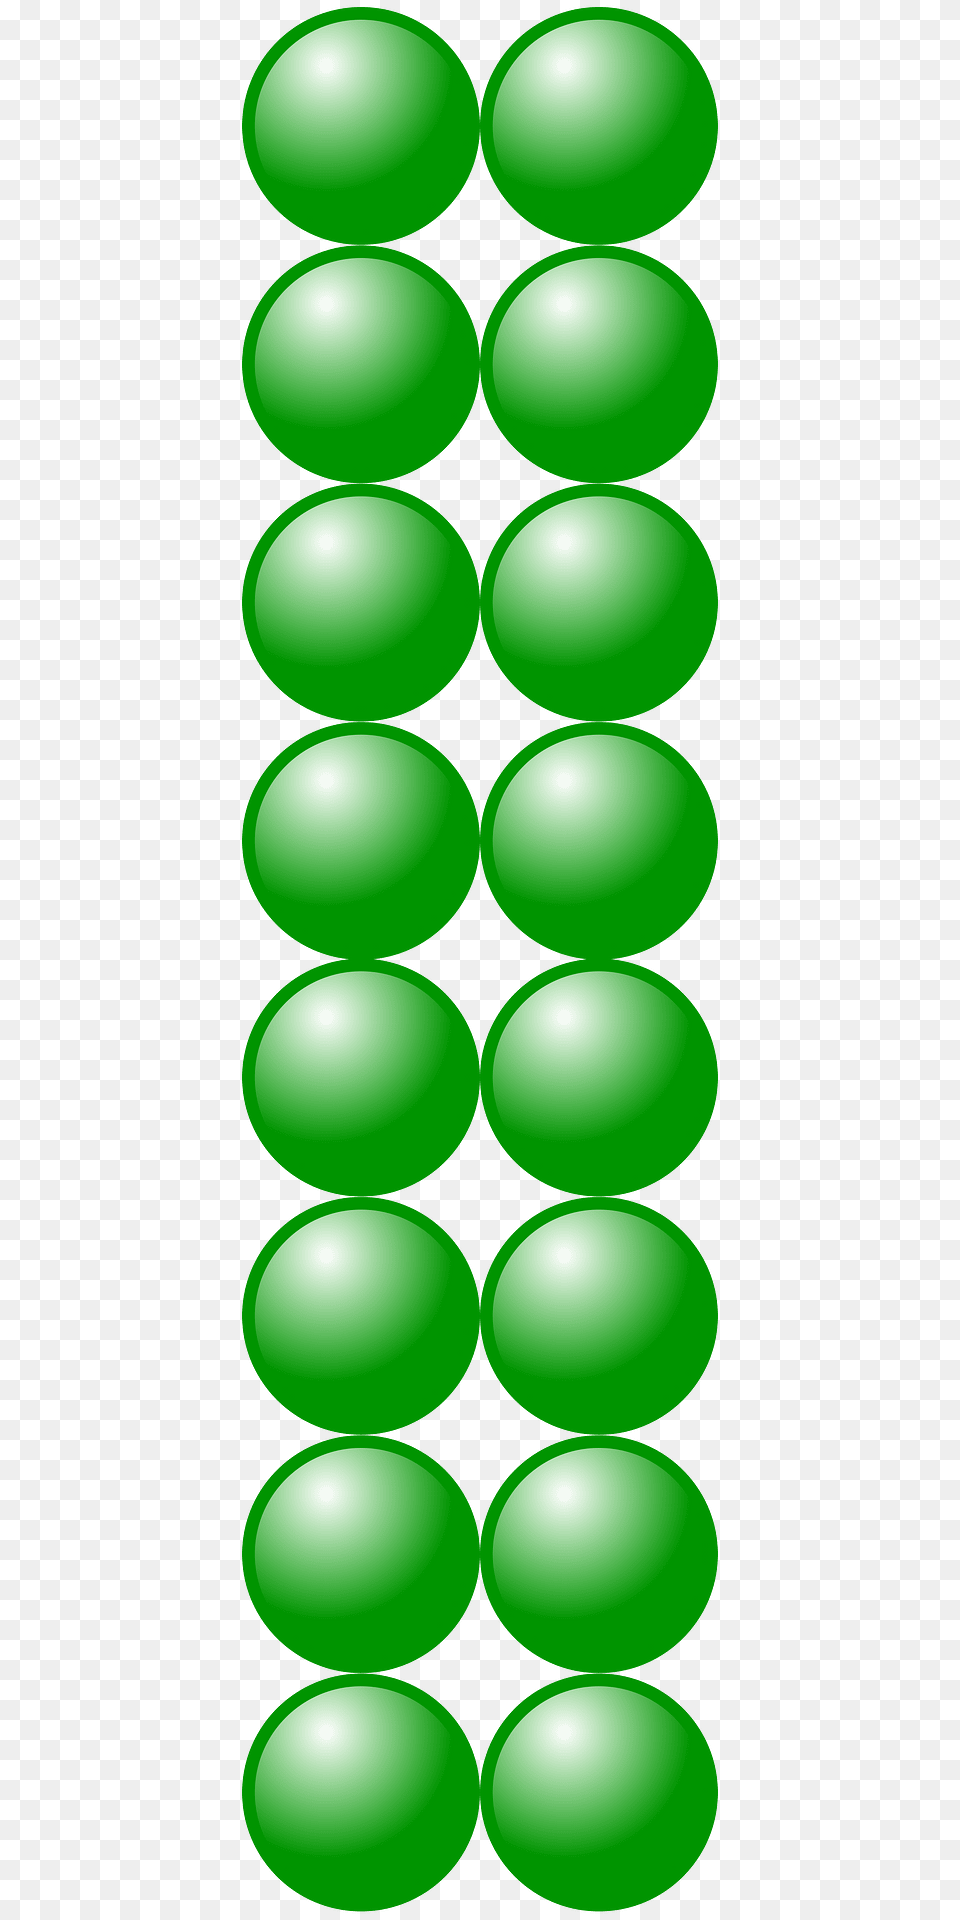 Beads Quantitative Picture For Multiplication 8x2 Clipart, Coil, Green, Spiral, Pattern Png